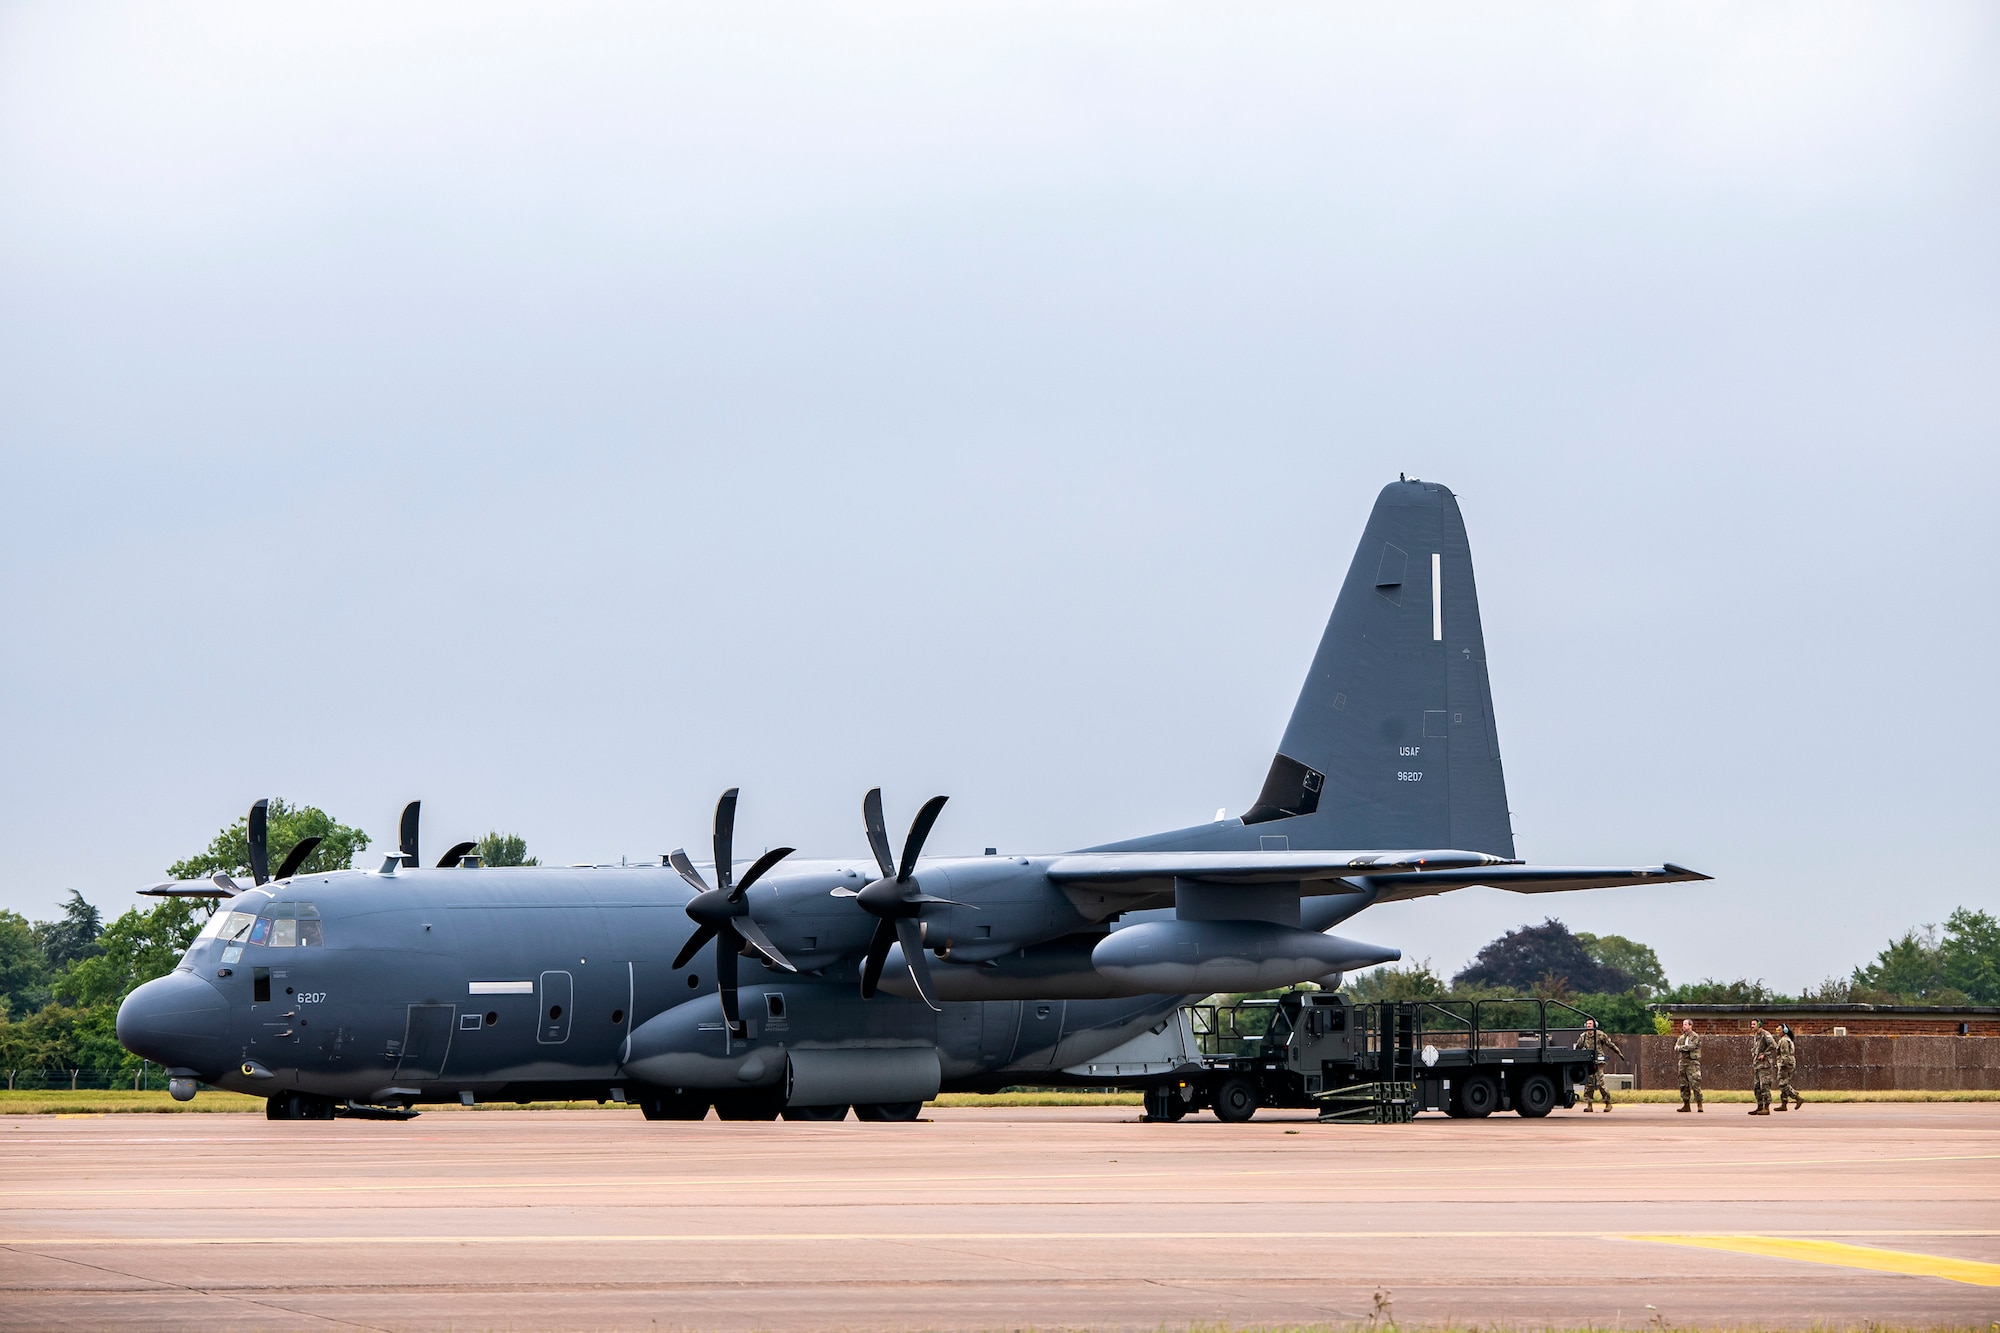 Aircrew of a MC-130J Commando II assigned to the 352d Special Operations Wing prepare to unload cargo during an Agile Combat Employment exercise at RAF Fairford, England, Sept. 13, 2021. Airmen from the 501st Combat Support Wing, 100th Air Refueling Wing and 352d SOW partnered to conduct an ACE exercise to test their overall readiness and lethality capabilities. The exercise enables U.S. forces in Europe to operate from locations with varying levels of capacity and support. (U.S. Air Force photo by Senior Airman Eugene Oliver)